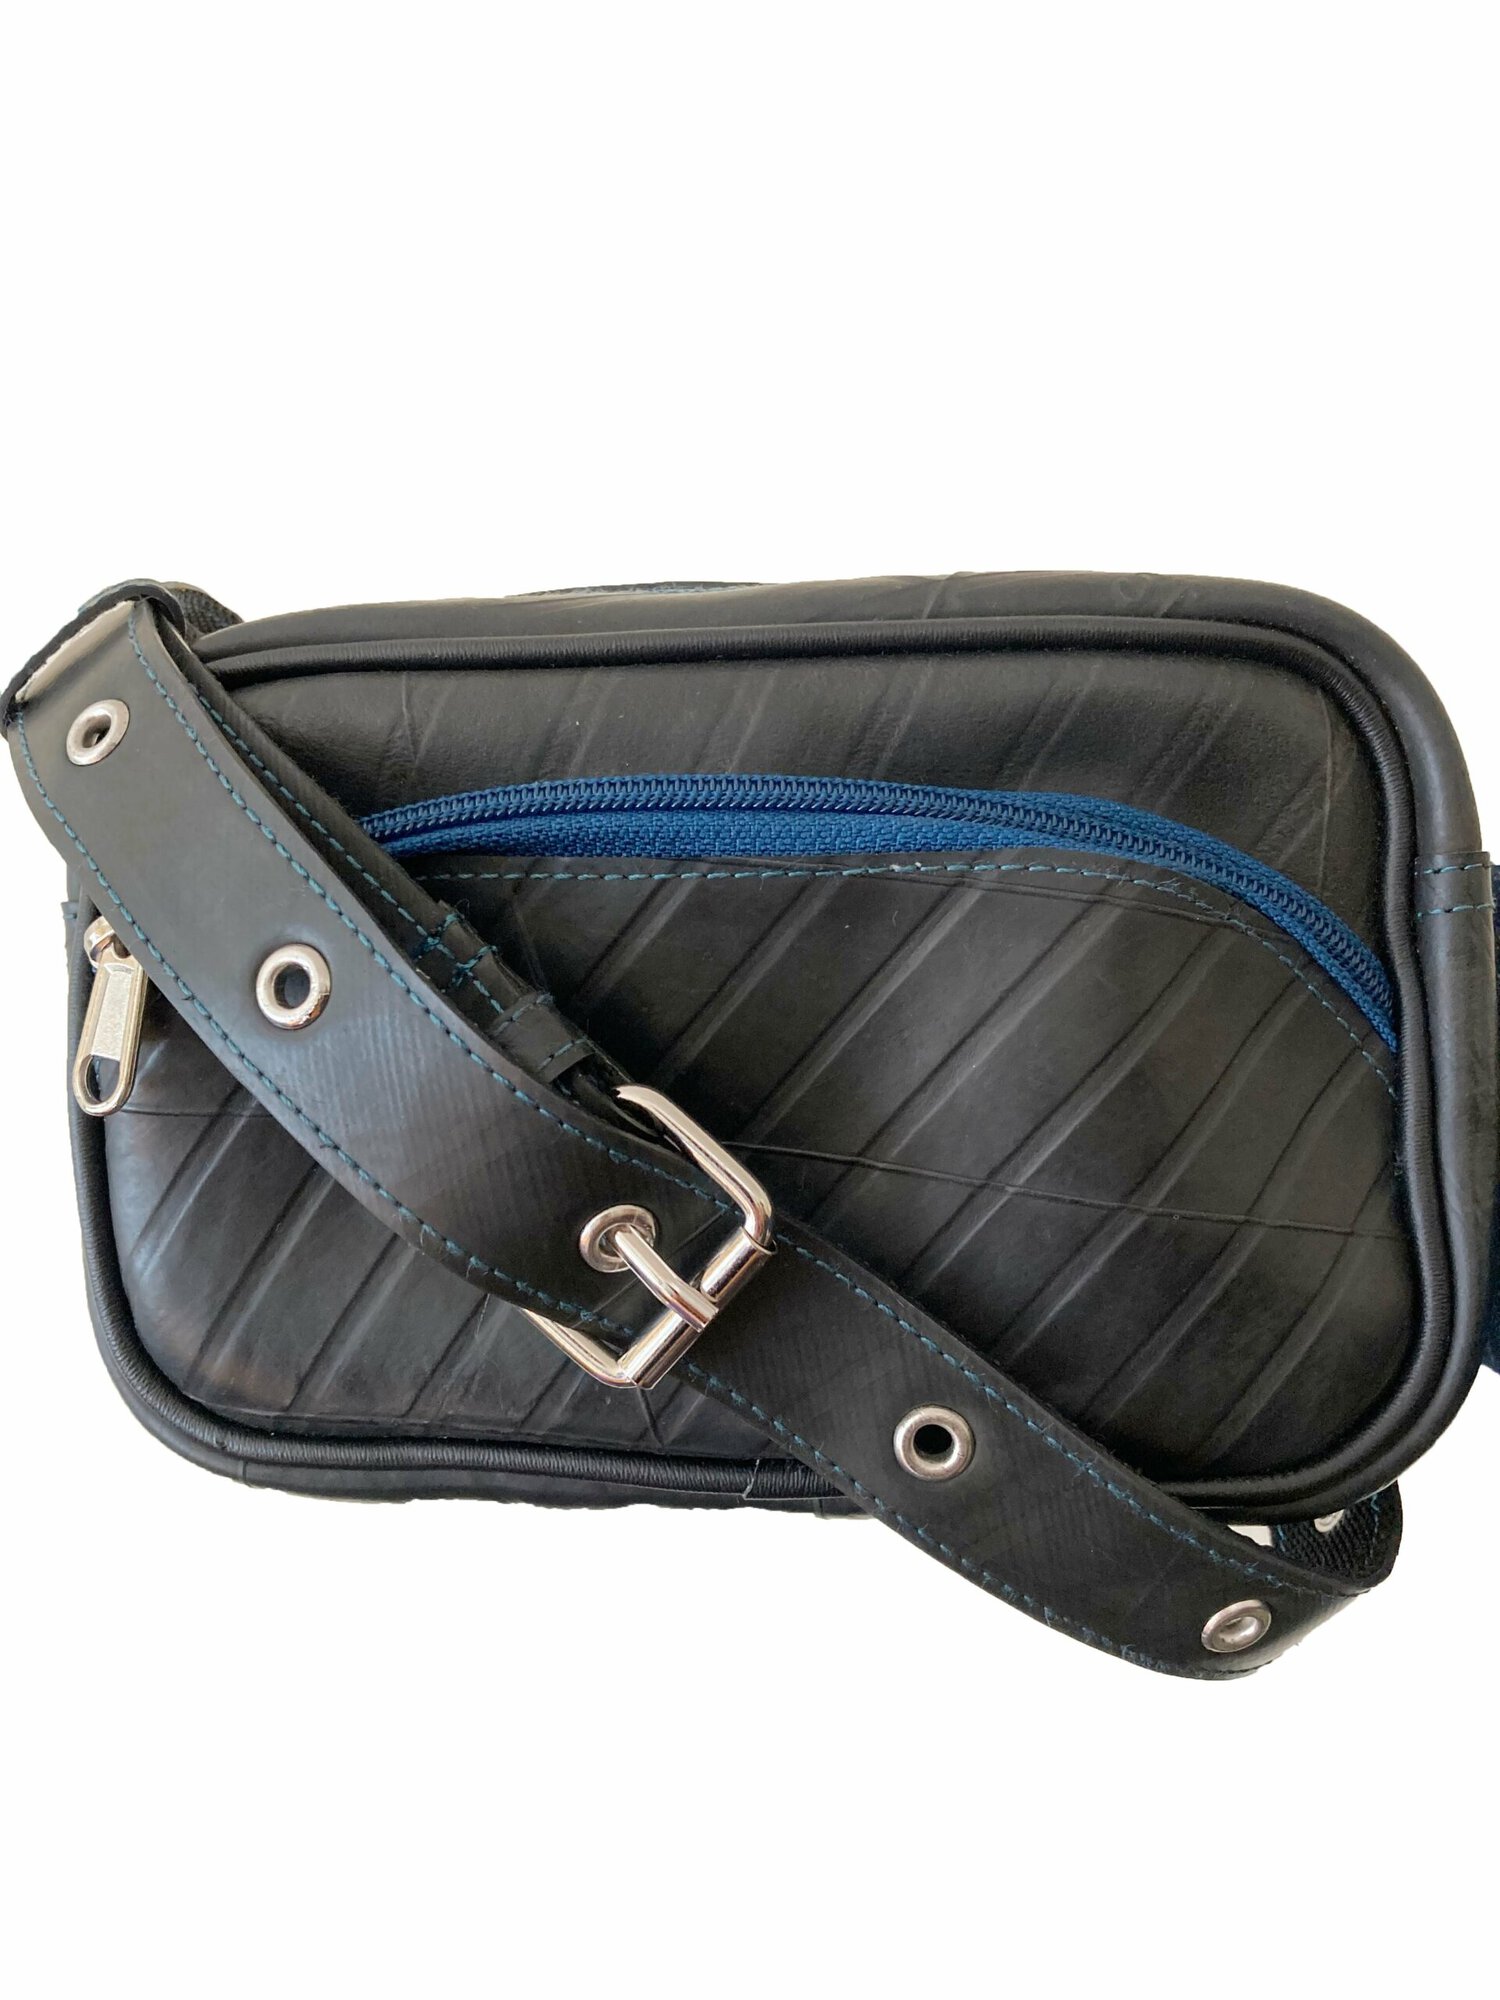 Unisex Bum Bag-recycled Tyre - peacock